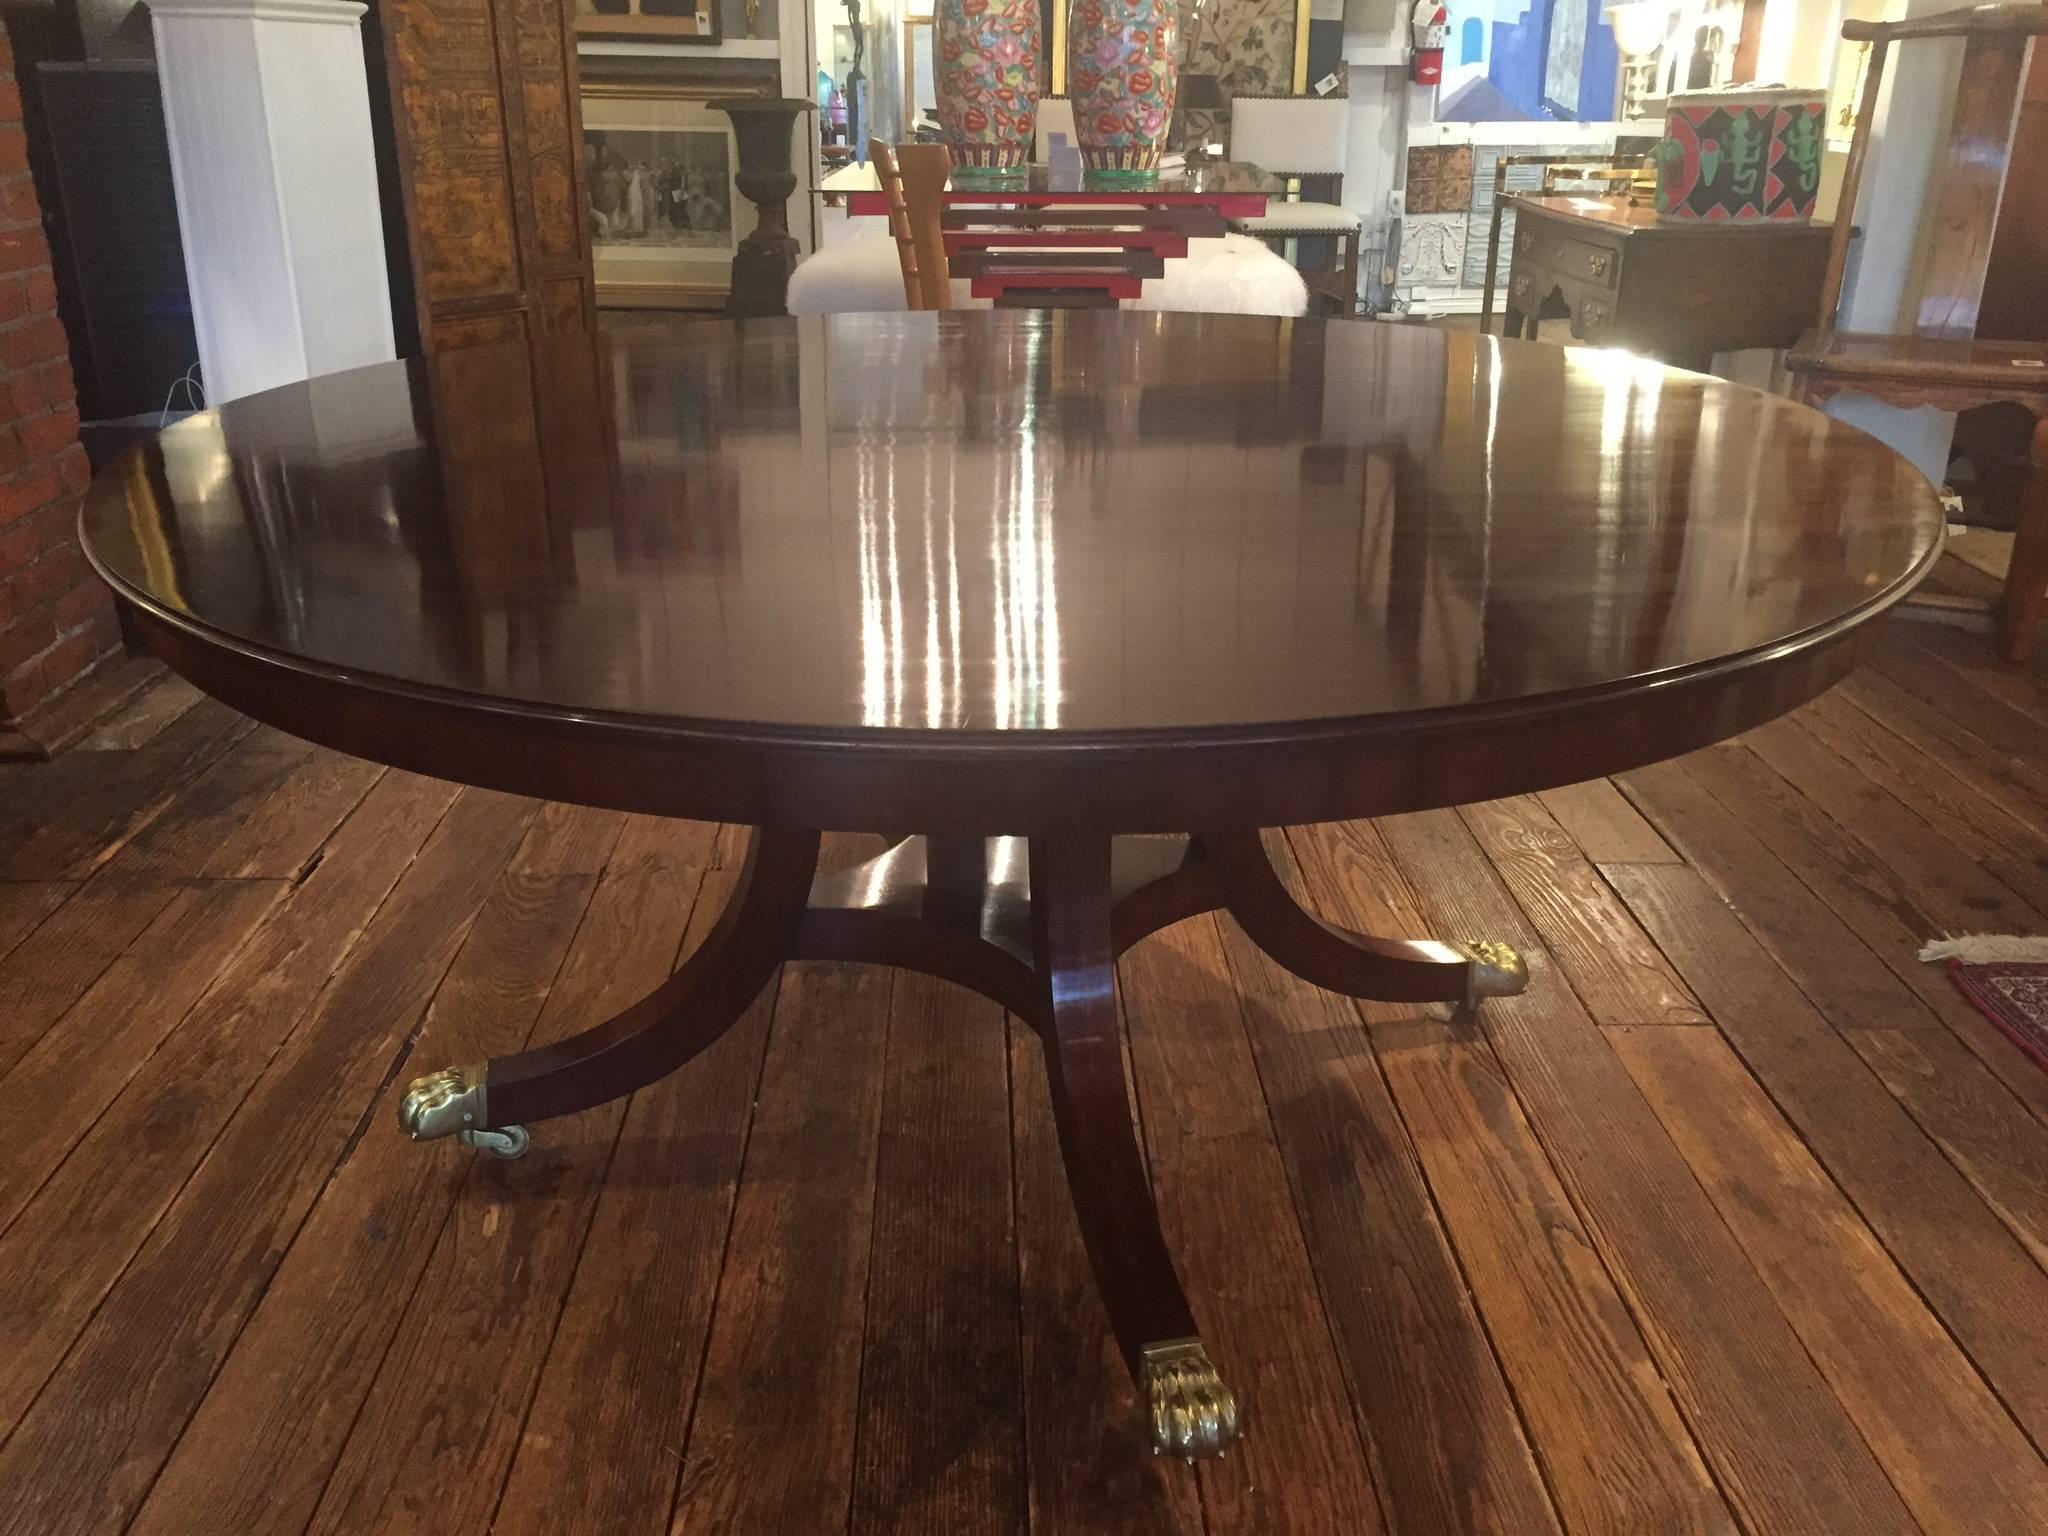 Regency Regal Enormous Round Mahogany Dining Table with Peripheral Leaves